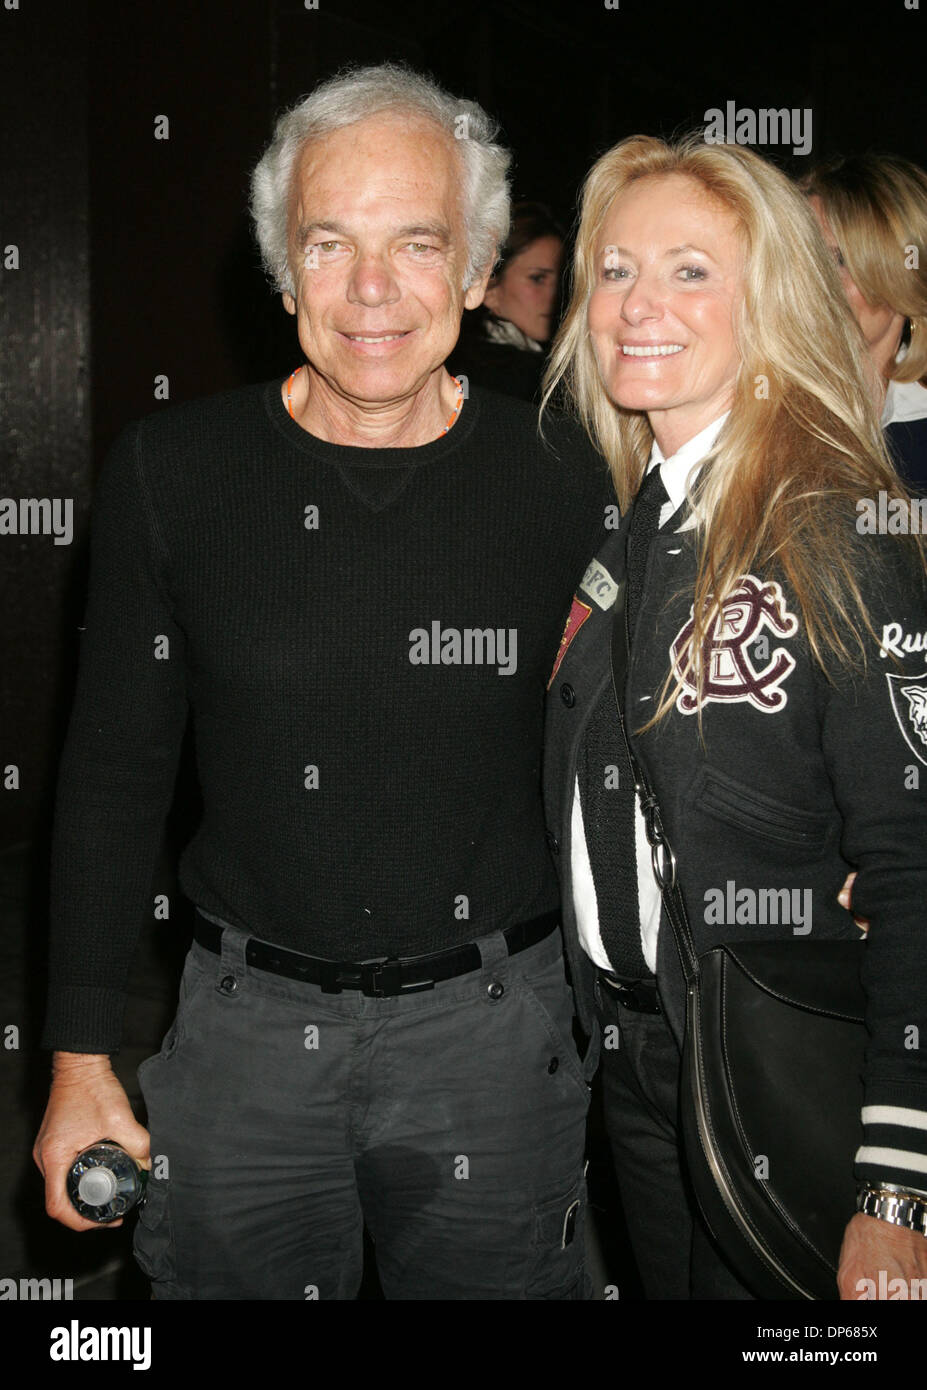 Oct 09, 2006; New York, NY, USA; Designer RALPH LAUREN and his wife ...